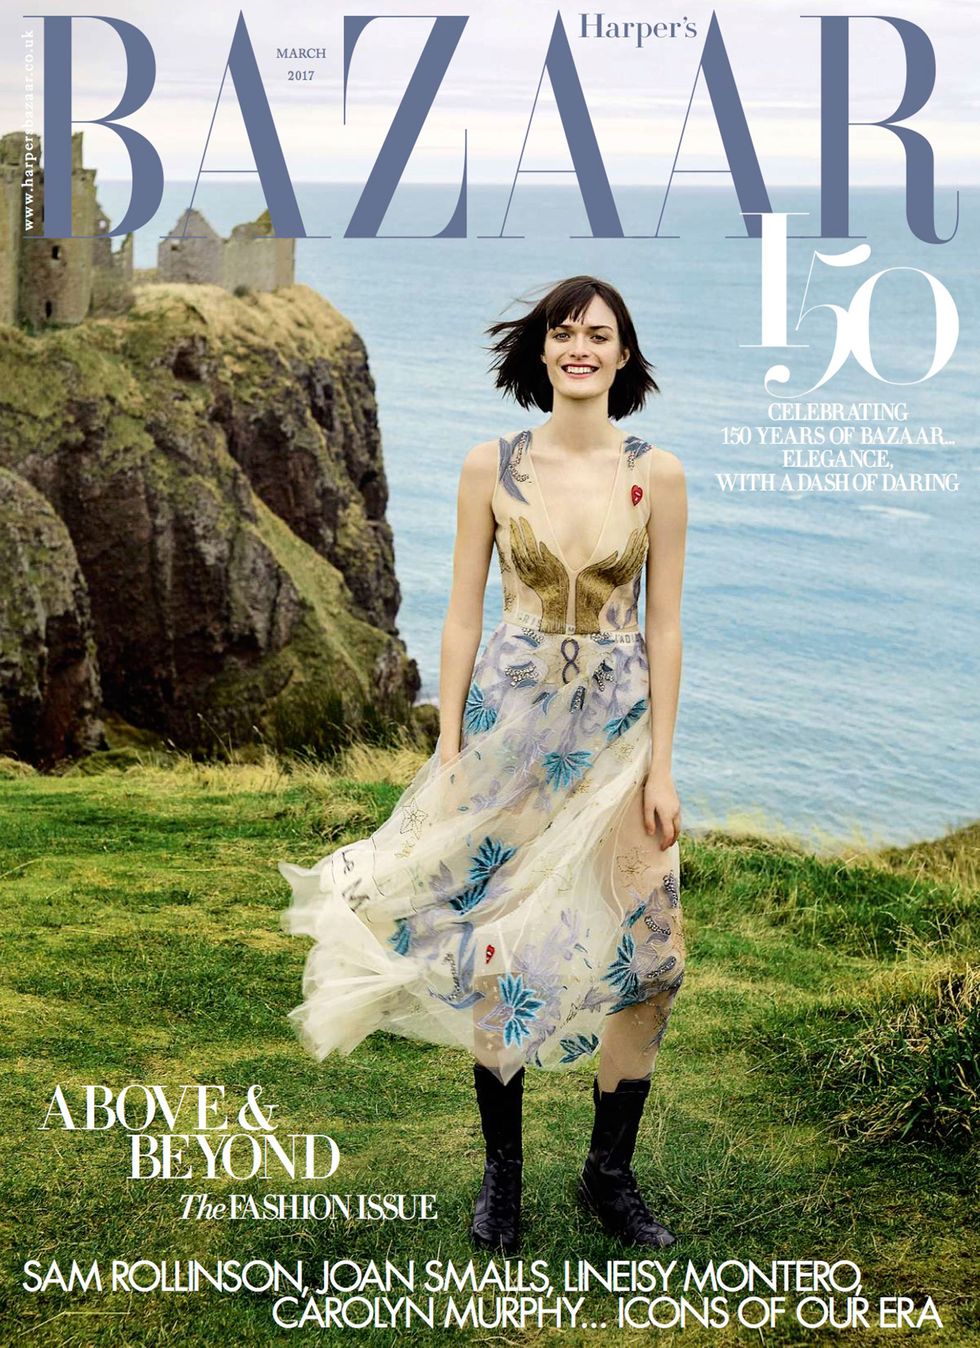 Sam Rollinson on the March 2017 cover of Harper's Bazaar